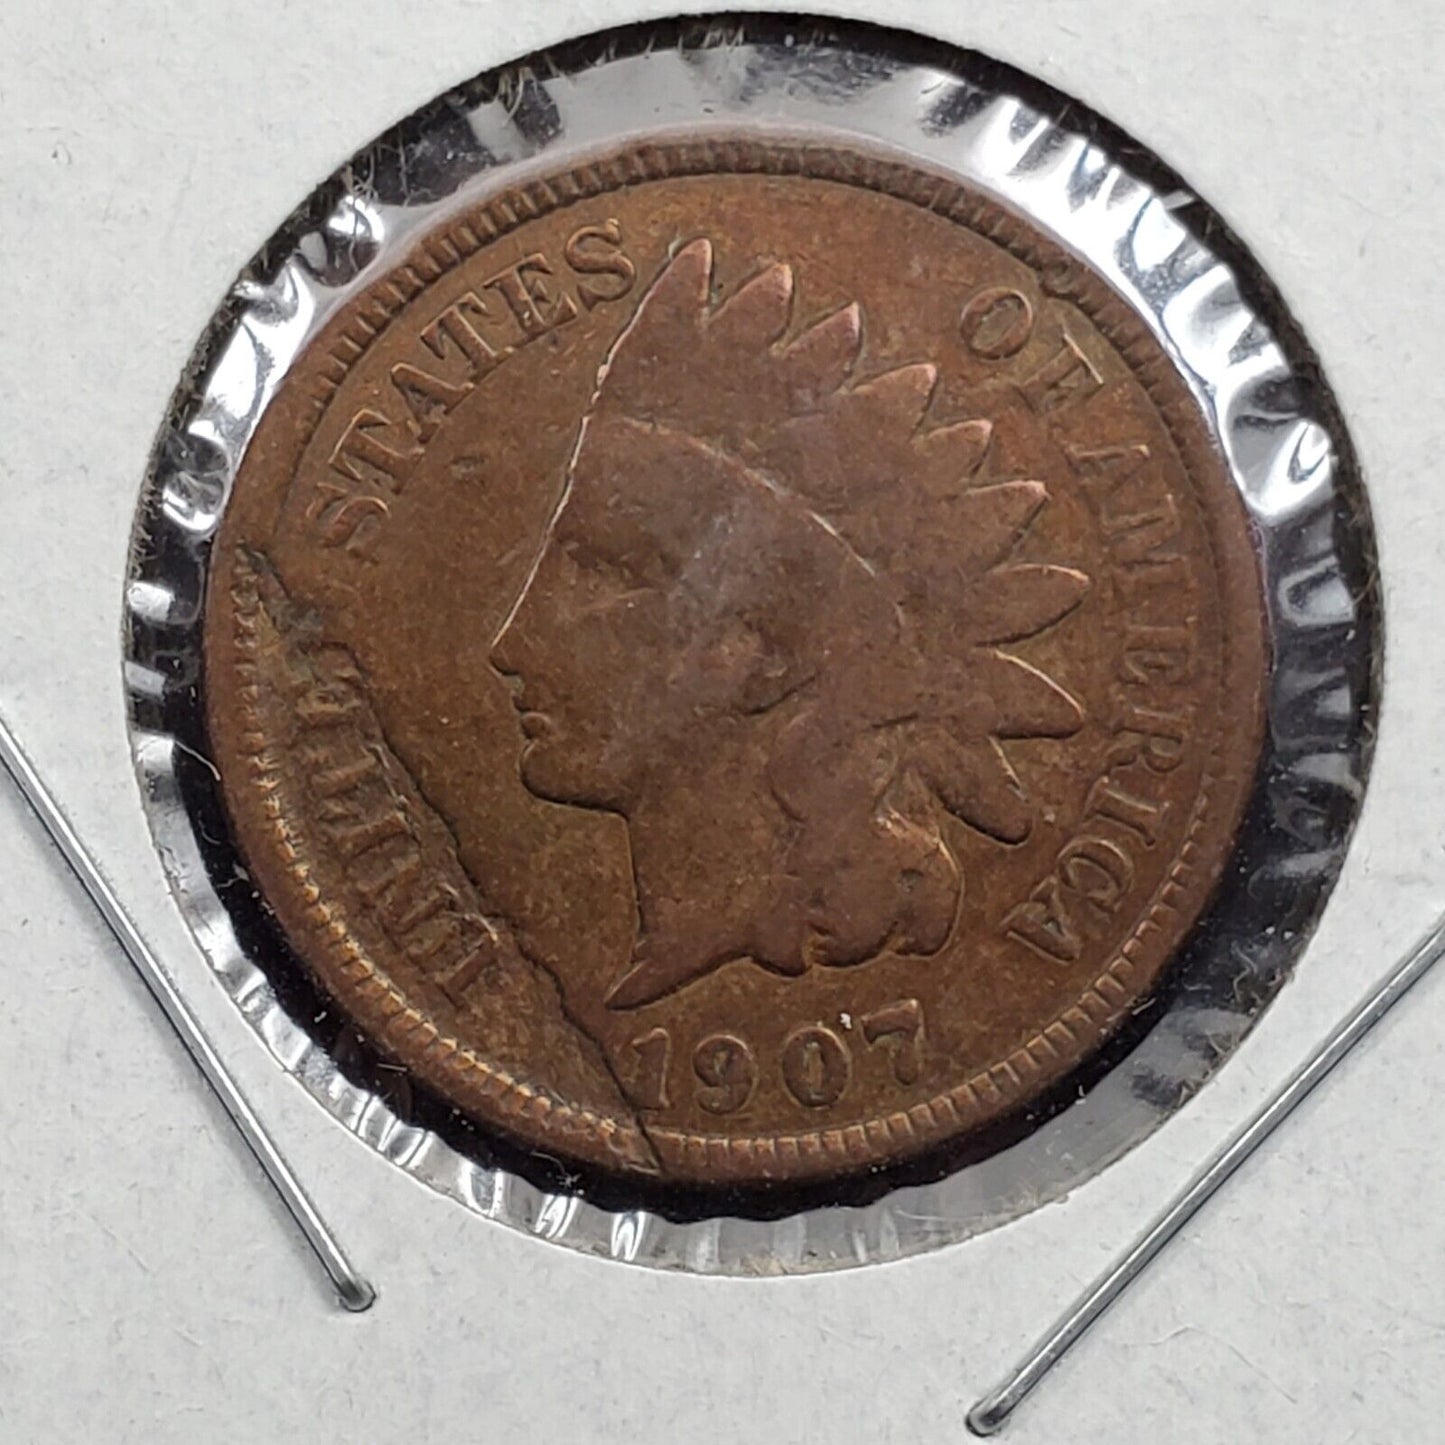 1907 INDIAN HEAD CENT PENNY ERROR COIN Laminated Panchet